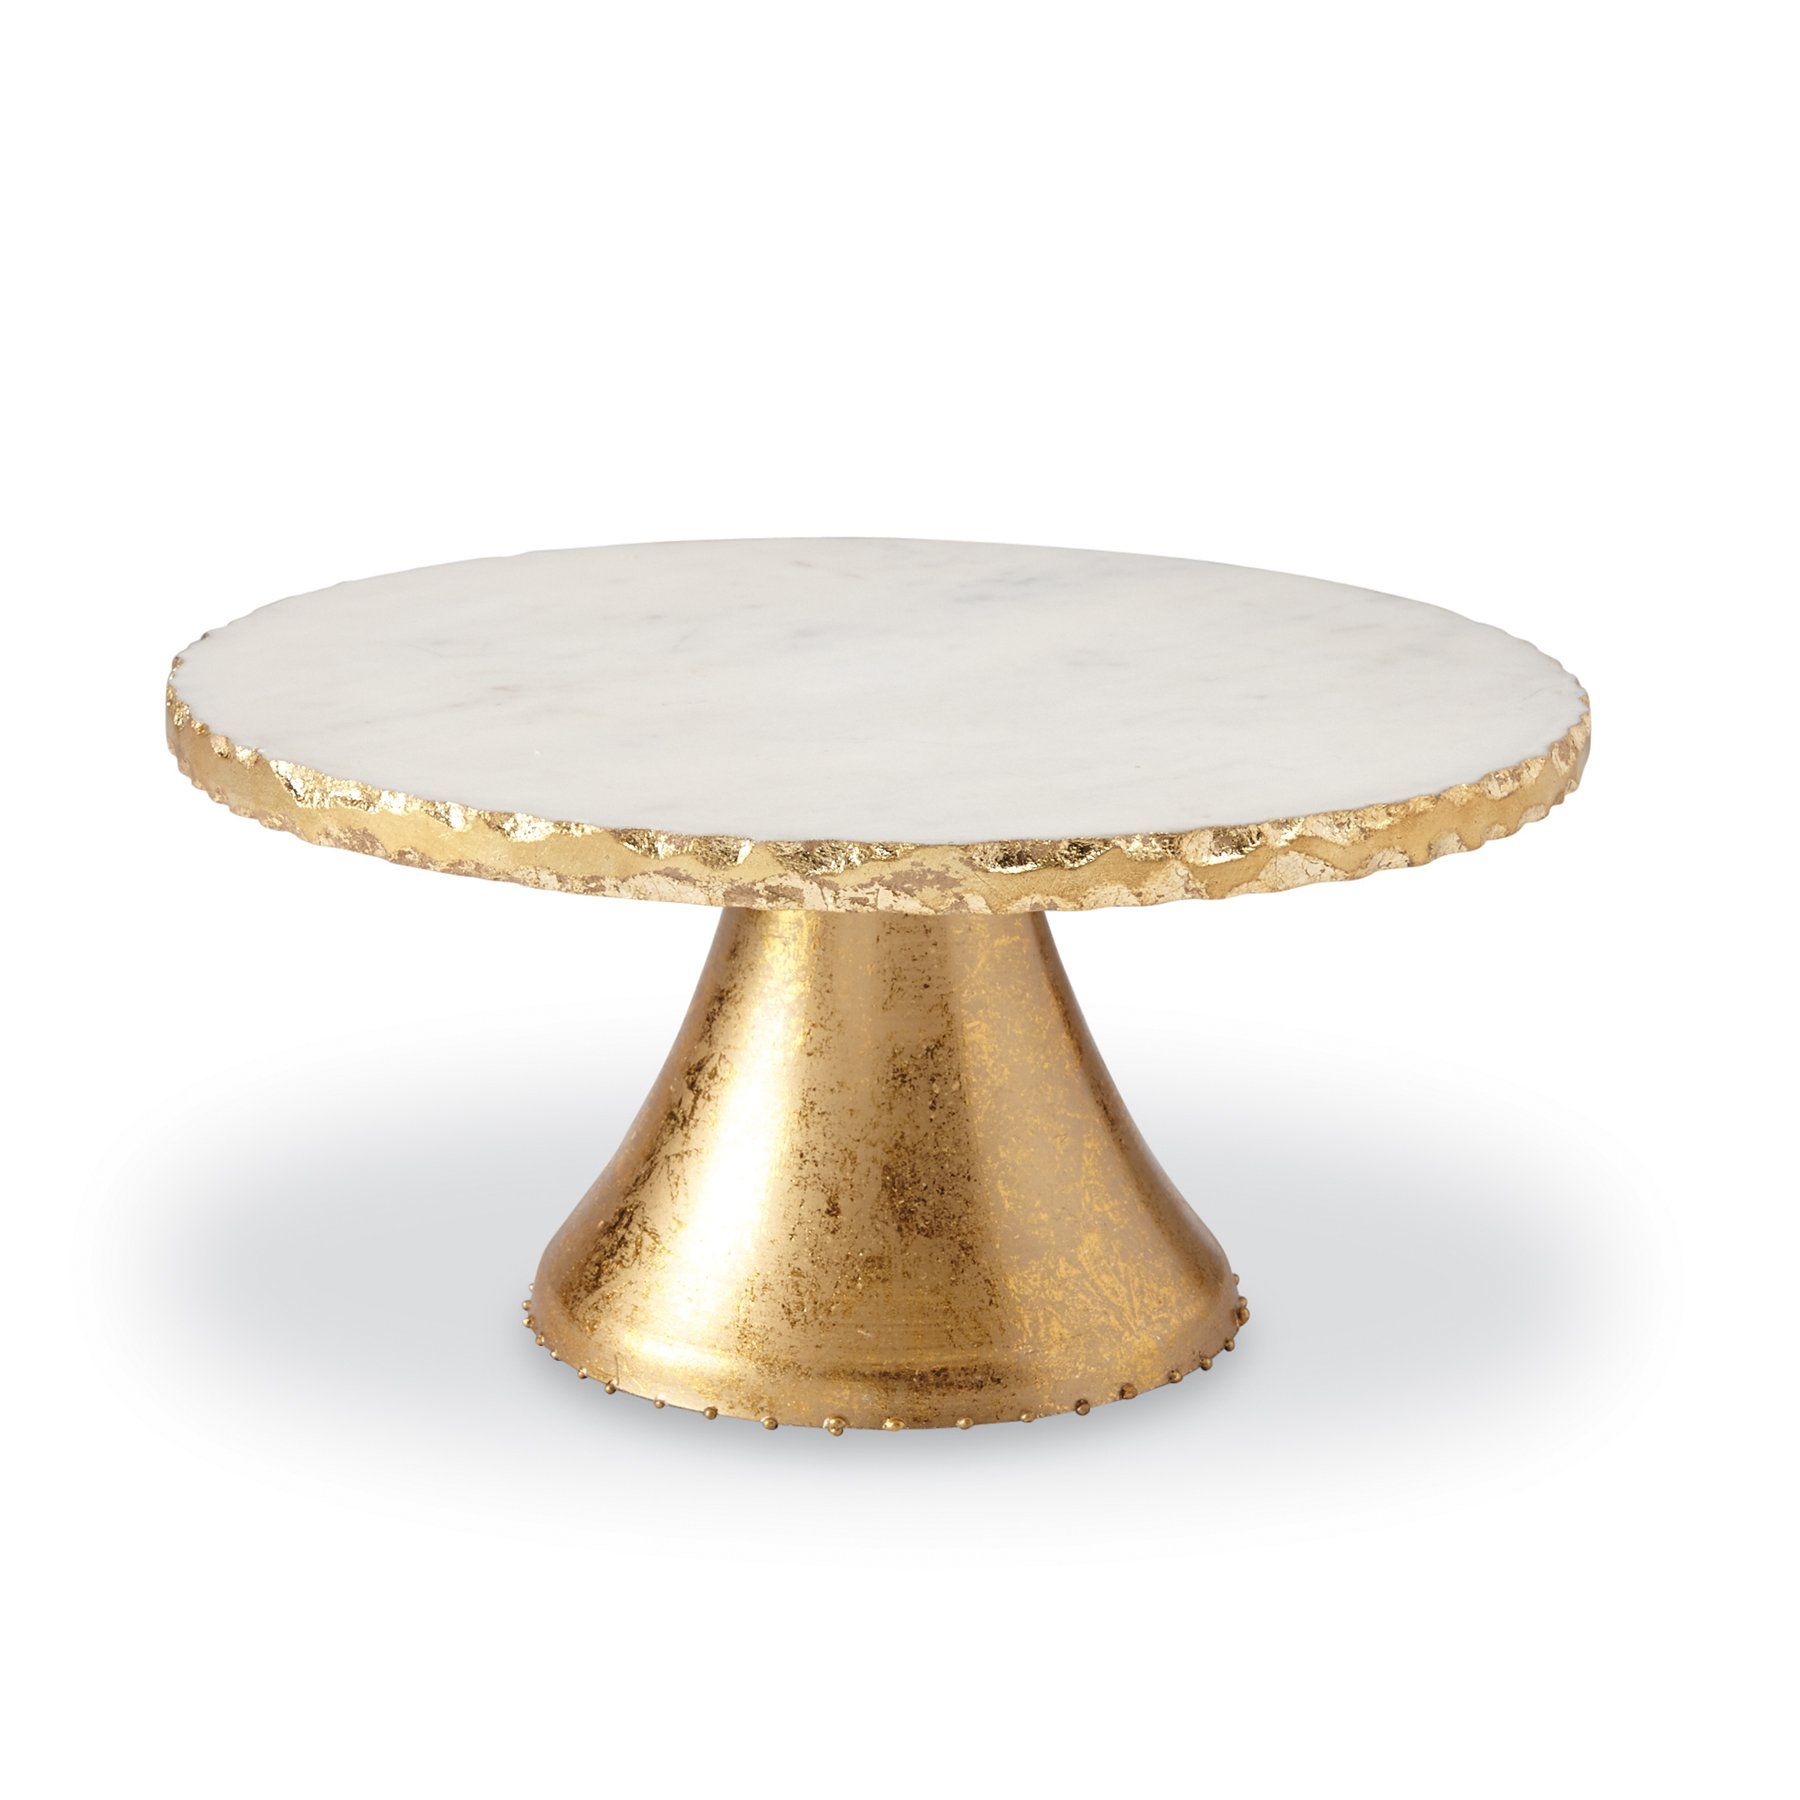 Mud Pie Marble Pedestal Cake Serving Stand, Gold | Amazon (US)